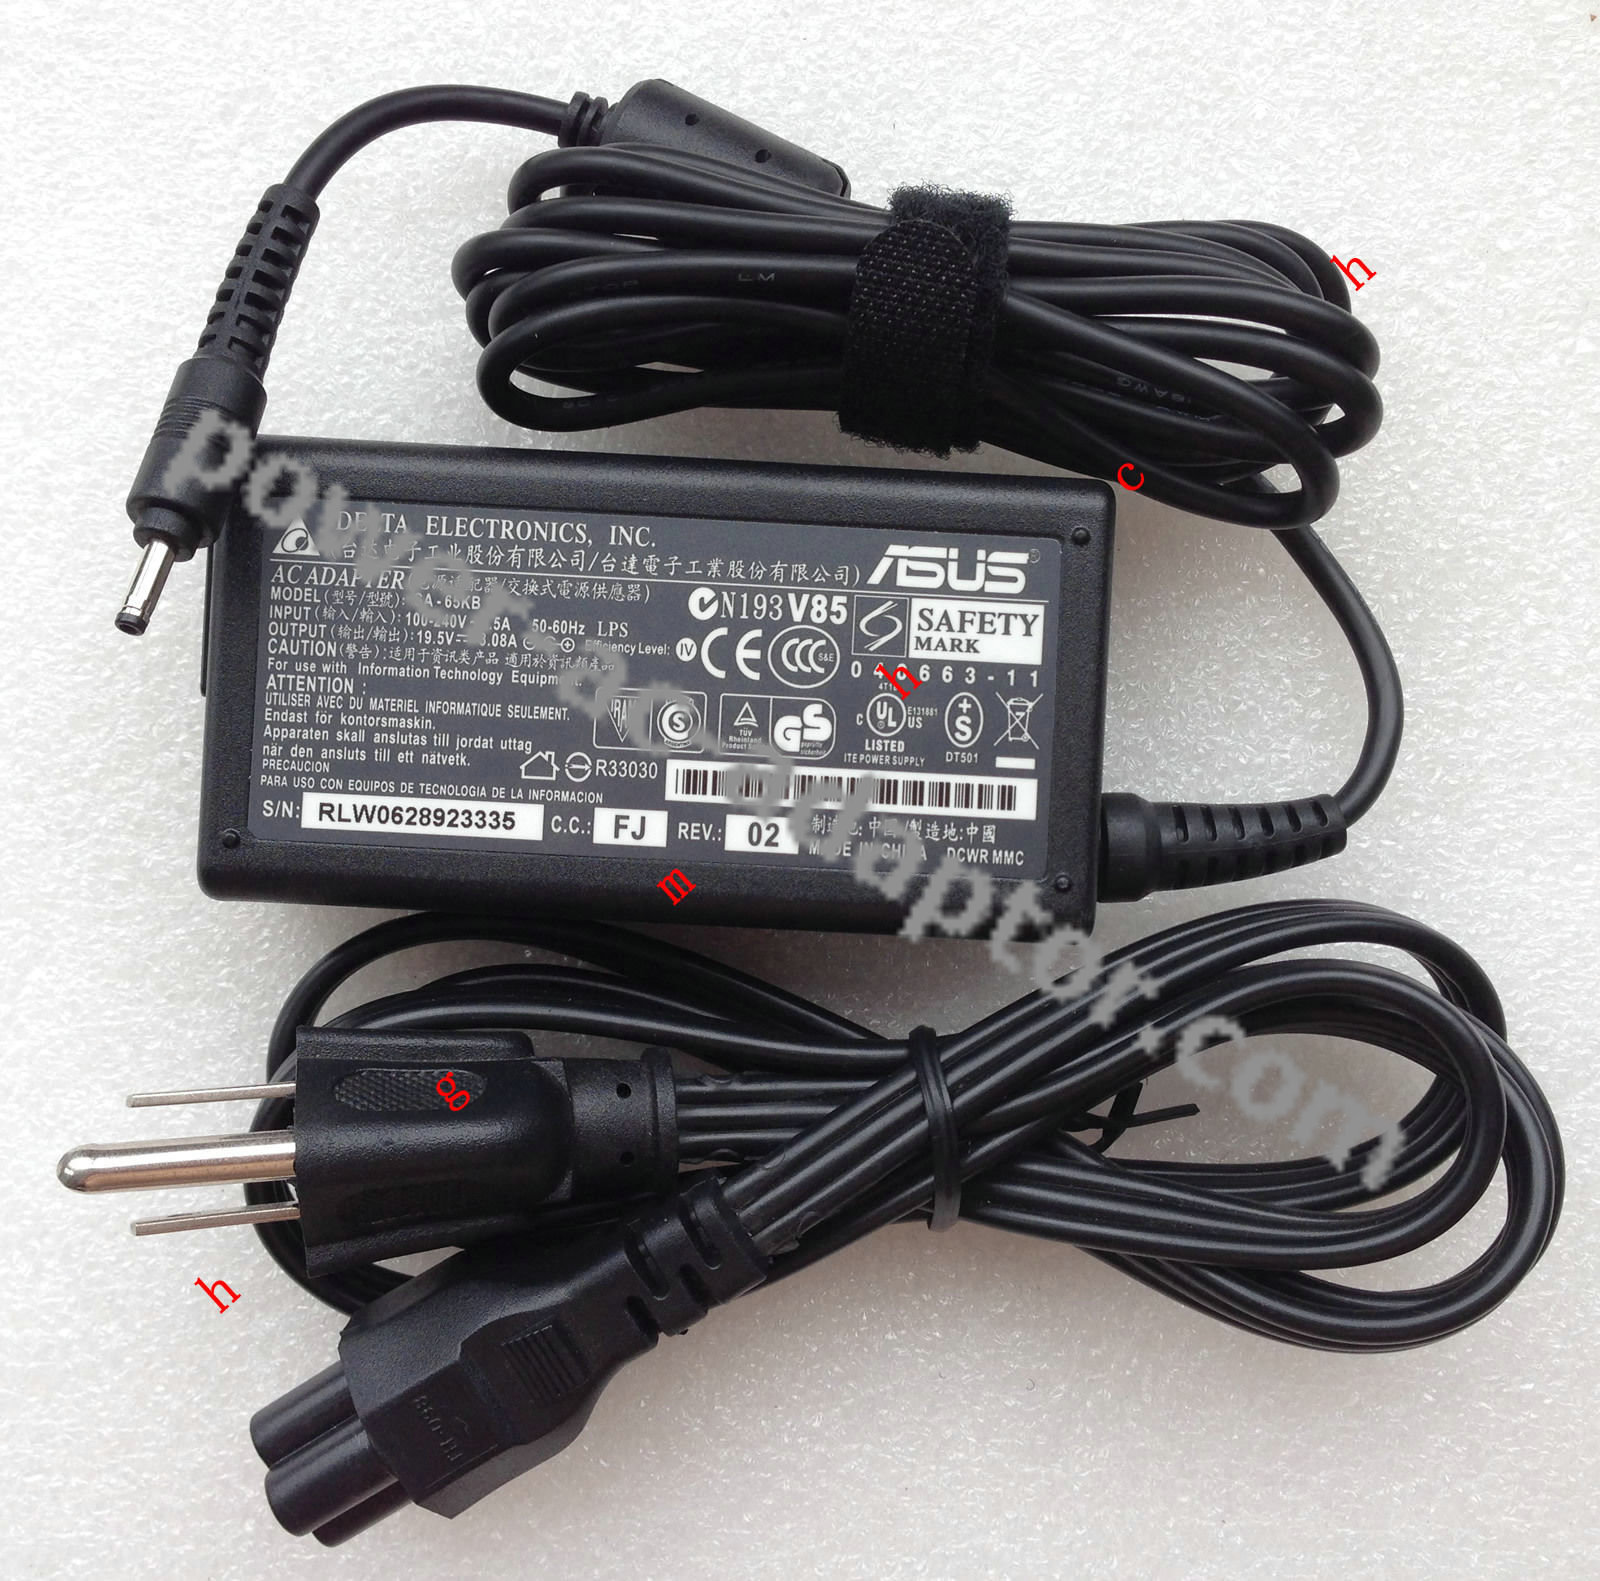 19.5V 3.08A Asus Eee Pad EP121-1A009M AC power Adapter Charger